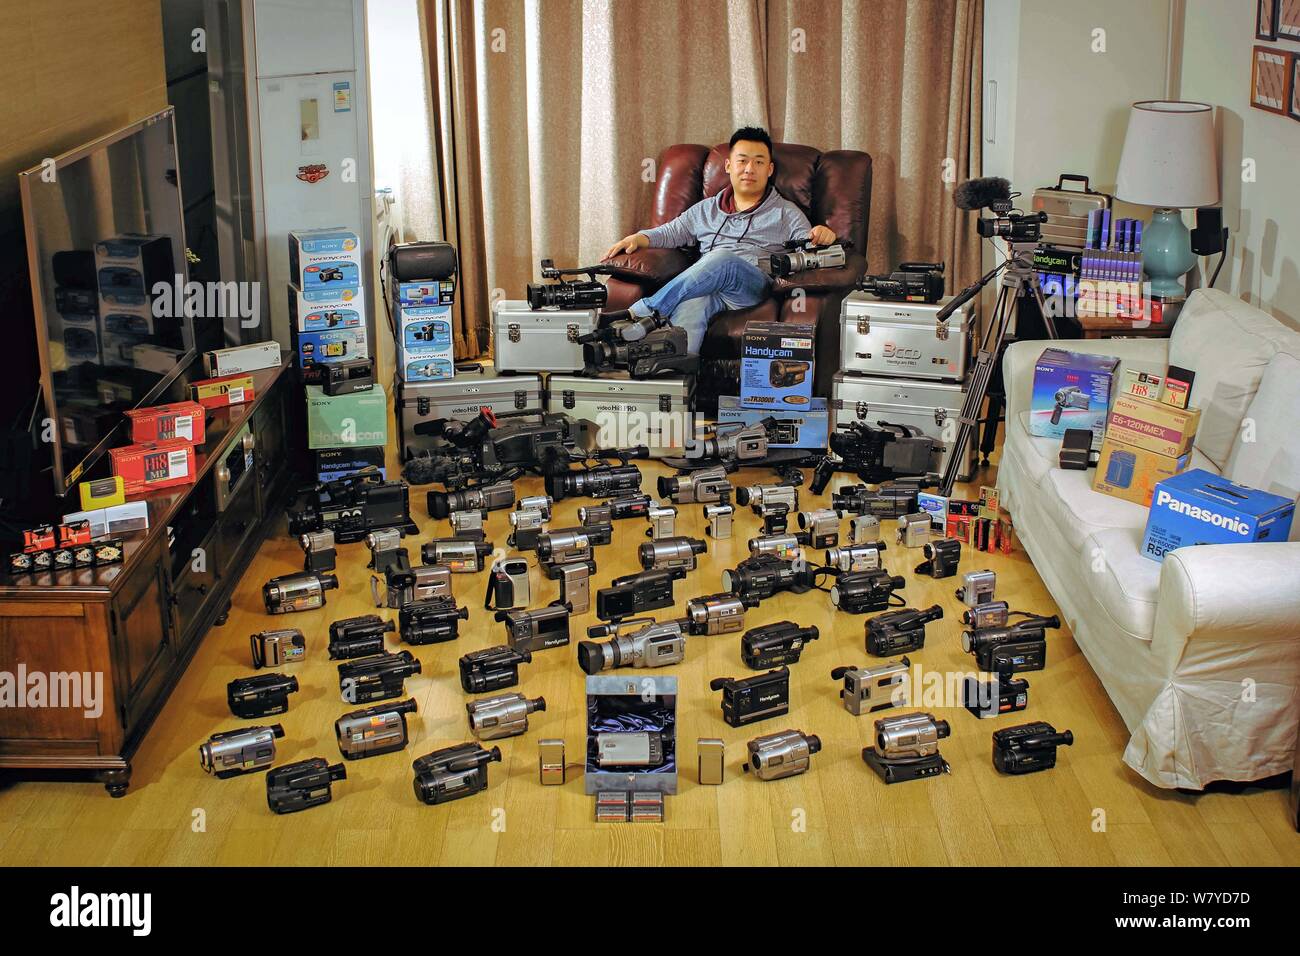 35-year-old Chinese videographer Mr. Gan shows his collection of video cameras at home in Tianjin, China, 4 March 2017.   A professional videographer Stock Photo